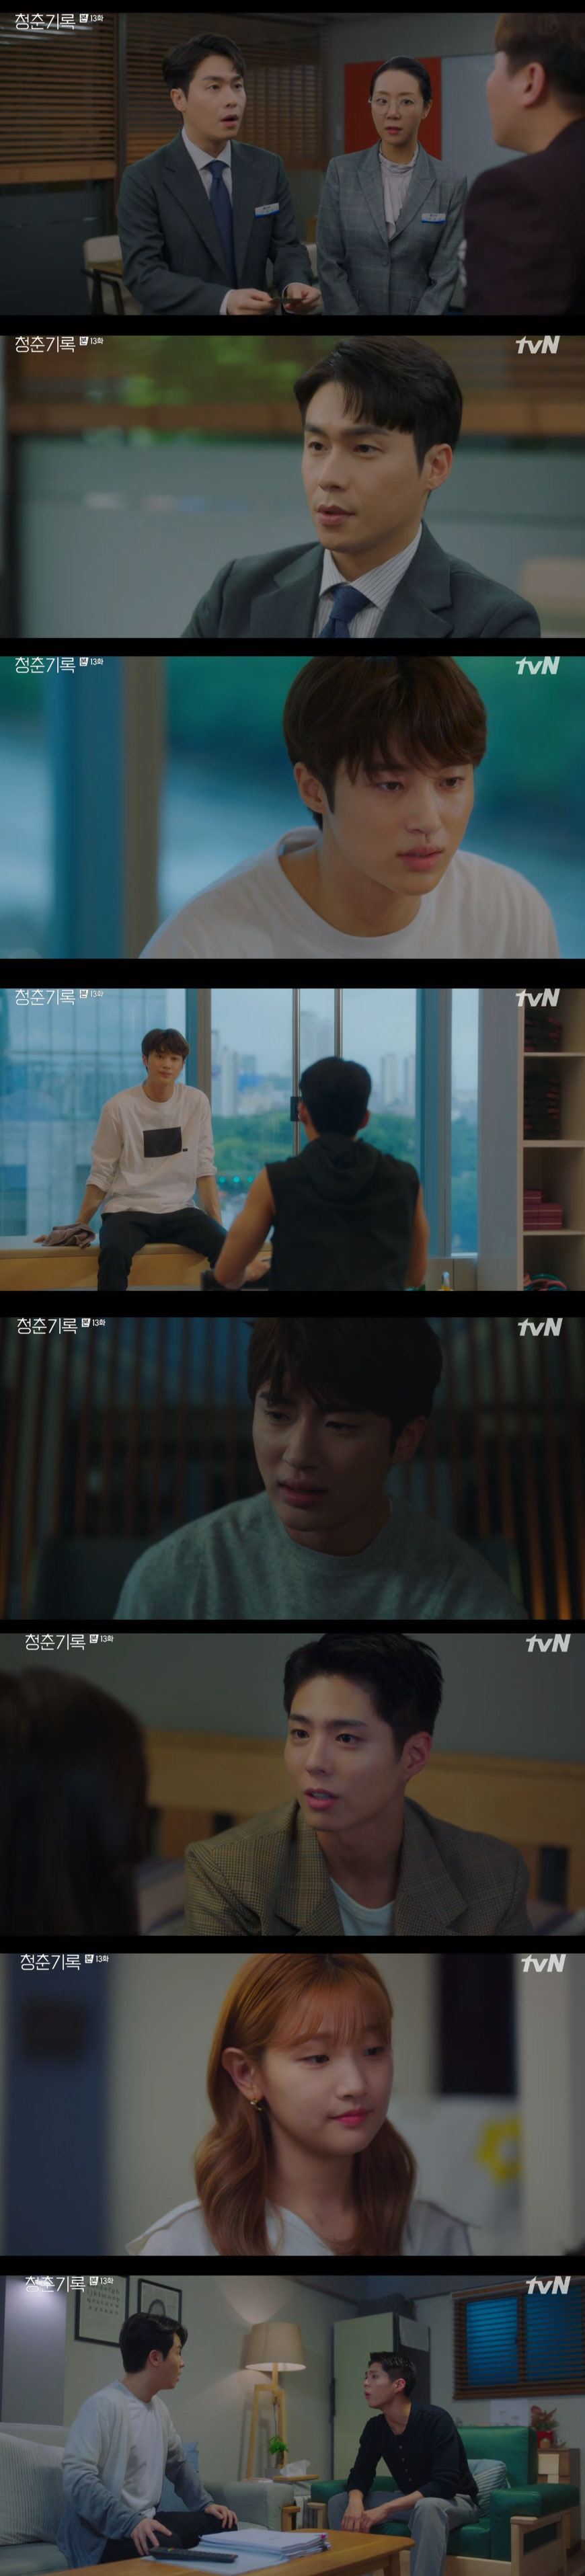 Record of Youth Park Bo-gum felt sad for Park So-damIn the TVN Monday drama Record of Youth broadcast on the 19th, there was a conflict between Sa Hye-joon (Park Bo-gum) and Park So-dam.On this day, he served the tea to Won Hae-hyo (Byeon Woo-suk), who took him to a stable state.I was out of mental today and crossed the line. Im sorry. I should not have contacted you.Won Hae-hyo said, You are mistaken, but you are good at Hye-joons friend. I have no other mind.I cant believe you like me, he said, relieved.The next day, an actor Jean Woo (Lee Sung-kyung) and a romance rumor that appeared together in the drama with Sa Hye-joon broke out.After returning from a fan meeting in Singapore, Sa Hye-joon checked the article and headed to An Jeong-ha.Seo Woo and people are friends, said Sa Hye-joon, and I believe you, I believe you only told me, so dont be hard with that.Lee Tae-soo (Lee Chang-hoon) visited Sa Hye-joons brother, Sa Kyung-joon (Lee Jae-won). Lee Tae-soo handed over the gift certificate and said, Champon Enter should be fed by Hye-joon, but we are different.Im going to give you a lot of down payment, he said.At that time, Park Do-ha (Kim Gun-woo) told Won Hae-hyo, I liked you. I think there was a fantasy in the gold spoon.I wanted to be friends with you because of the surrogate satisfaction. I came here on my own. Im not paying for my follower.So I recognized it. Its fake. Your number, he said. If you did not, did your mother do it? She looked at you and decided to love me more.Then Won Hae Hyo said, Thank you for the favor you gave me. Lets do it there. Park Do-ha said, I am not so good now.So, Won Hae-hyo asked Kim Yi-young (Shin Ae-ra) Did your mother manipulate my SNS followers? And Kim Lee Young-eun said, I do. Its hard to lie alone. Lets do it together.Then Won Hae Hyo said, Why should I lie together? And Kim Lee Young-eun Because you have benefited, there is also a recognition.Its hot for young kids, he said, its a plus for a new cast like you.Sa Hye-joon and Won Hae-hyo met on set. Sa Hye-joon checked the text he received from Ahn Jung-ha, and then Won Hae-hyo said, He will go to the makeup interview with Lee Hae-ji (Hye-ri) today.Sa Hye-joon said, How do you know? And Won Hae-hyo said, I introduced you.I went to a stable understanding, and Lee said, I wanted to meet my sister to pass her face. I believe that Hyehyos brother credits me.Then, I want to be selected as a skill, said An Jeong-ha, who watched the YouTube video of An Jeong-ha, who was confirmed earlier, I am not so poor.I called Won Hae-hyo, who was stable. Thank you, you are a passer-by. You are a saver in my life.Sa Hye-joon visited the house of Ahn Jeong-ha for a while before shooting the advertisement, and while he was glad to see Sa Hye-joon, who is stable, Lee Min-jae (Shin Dong-mi) said, You and Hye-joon will fly Scandal.What does Hye-joon do? he recalled.Do not come home in the future, what if I and Scandal do it? I am a girlfriend, top star Jean, and I am the third romance runner.Sa Hye-joon said, You can have a public love affair. There is no restriction on meeting when you are in public love. But he said, What do I do when I break up with you?I asked, Why do you not call me and tell Haehyo when you have a good thing? He said, I have never been in touch with busy people, and I have come to you because I am busy.Im doing my best on a murderous schedule, he said. But Im doing my best. I need to make it easier to see for a while.I have to show a bright look to see for a while. Sae Hye-joon apologized, Im sorry. In particular, the last caller of Charlie Jung-jun at the end of the broadcast was reported as Sa Hye-joon, and the broadcast was finalized, raising tension.